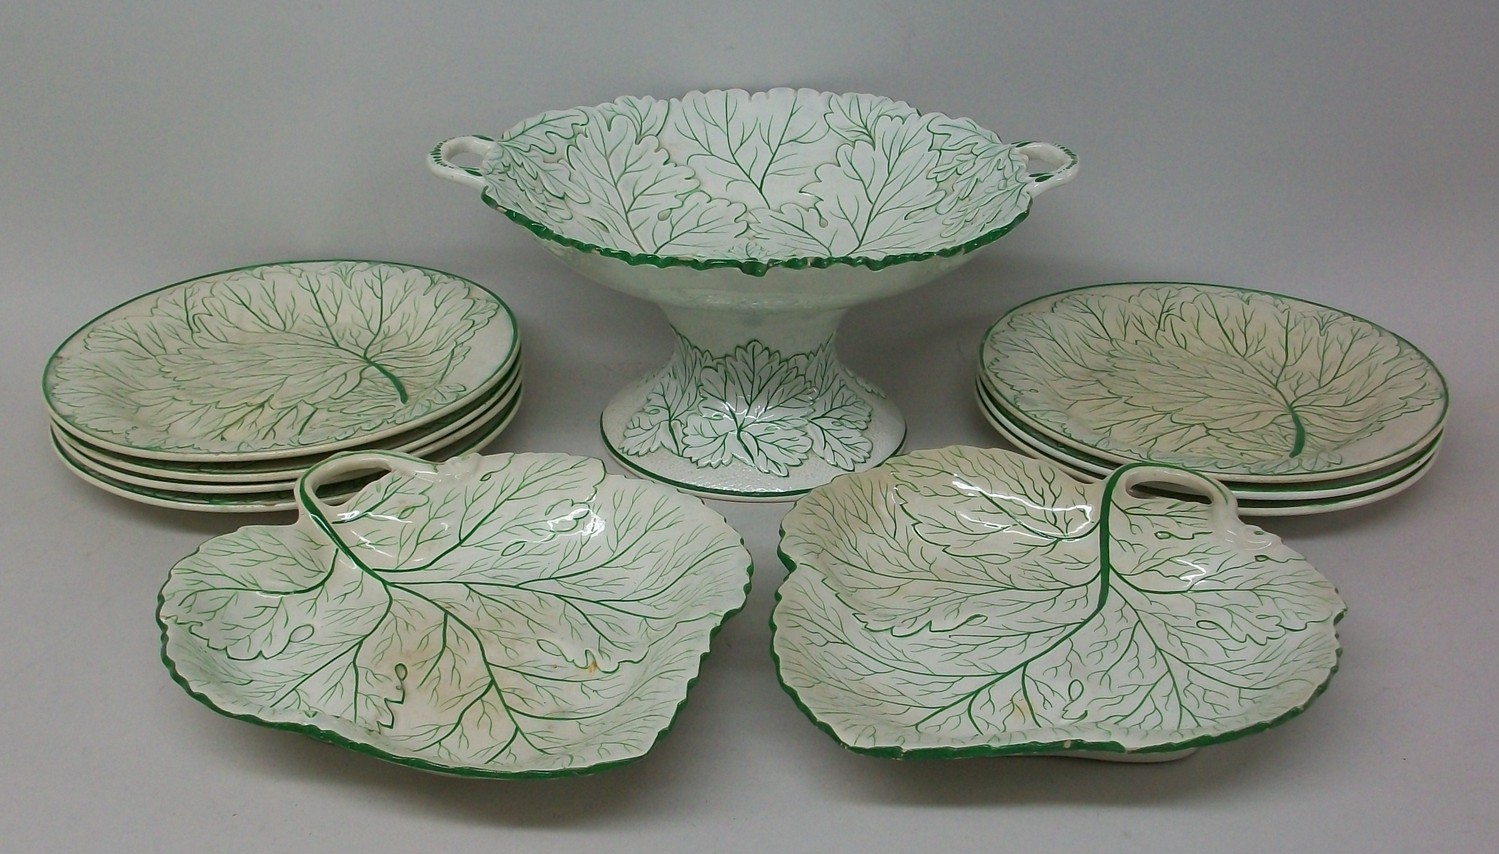 A Staffordshire pottery part dessert service, mid 19th century, with leaf moulded decoration,